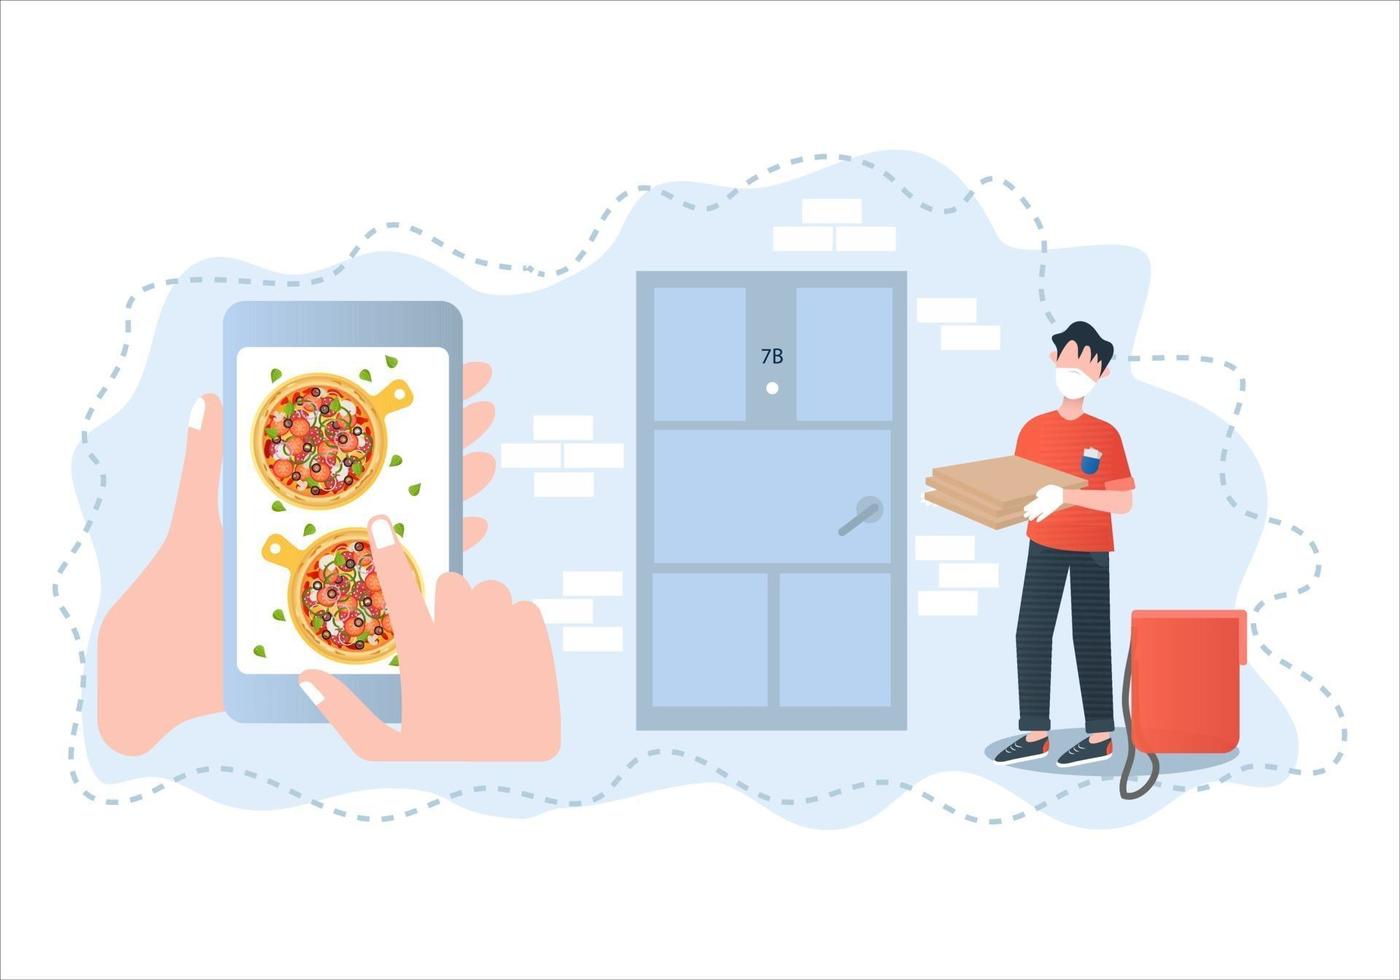 Pizza contactless delivery vector illustration. Pizza ordering via app. Touchless safe pizza home delivery vector illustration concept.